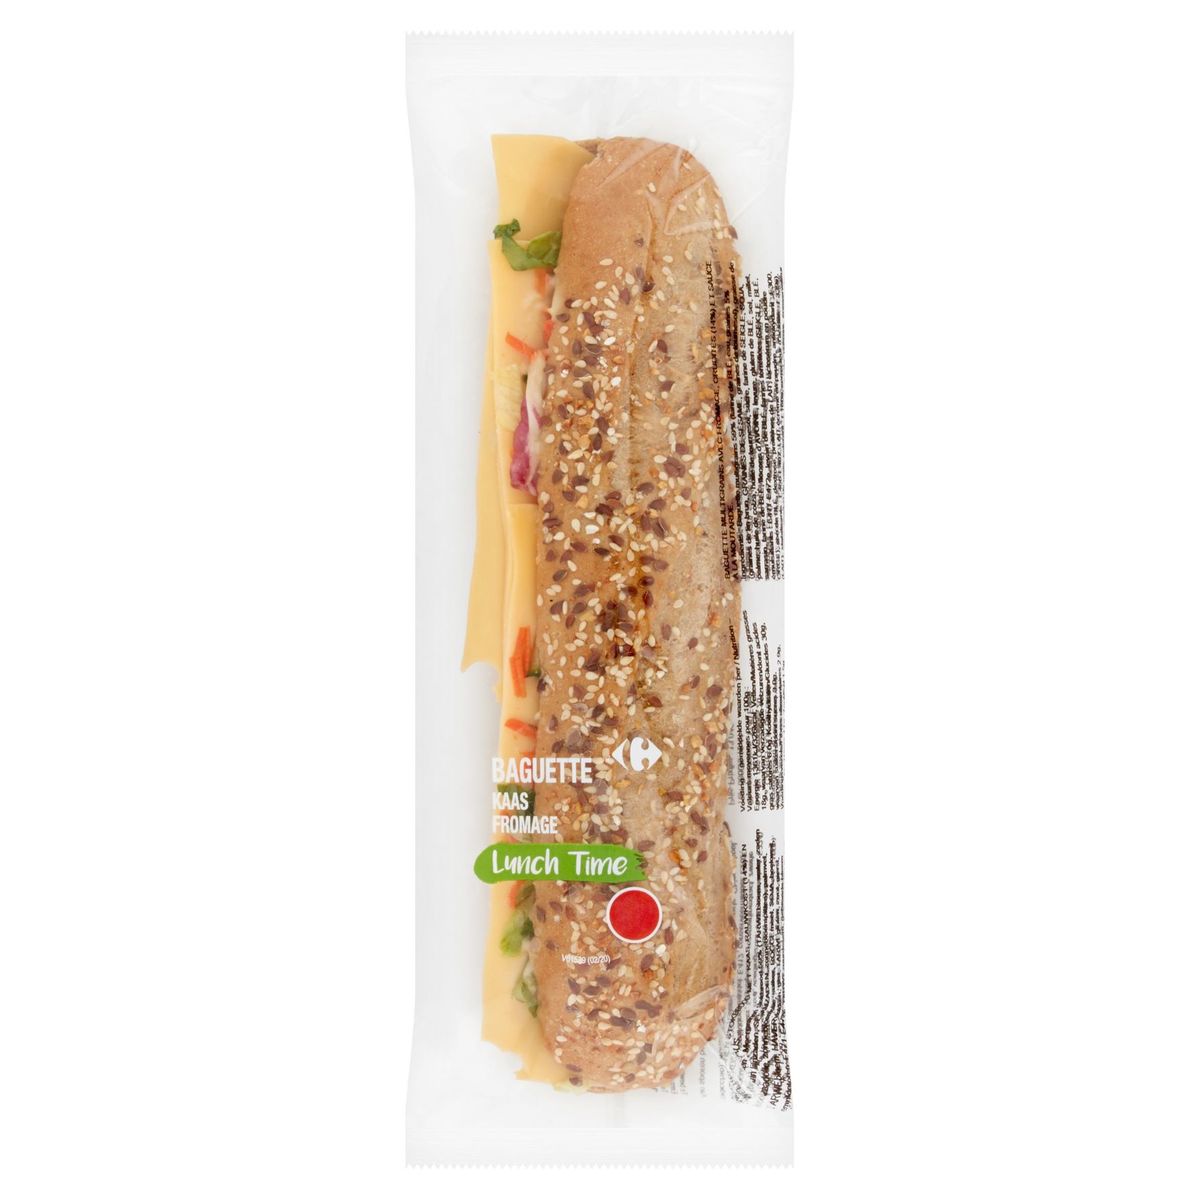 Carrefour Lunch Time Baguette Kaas 230 g